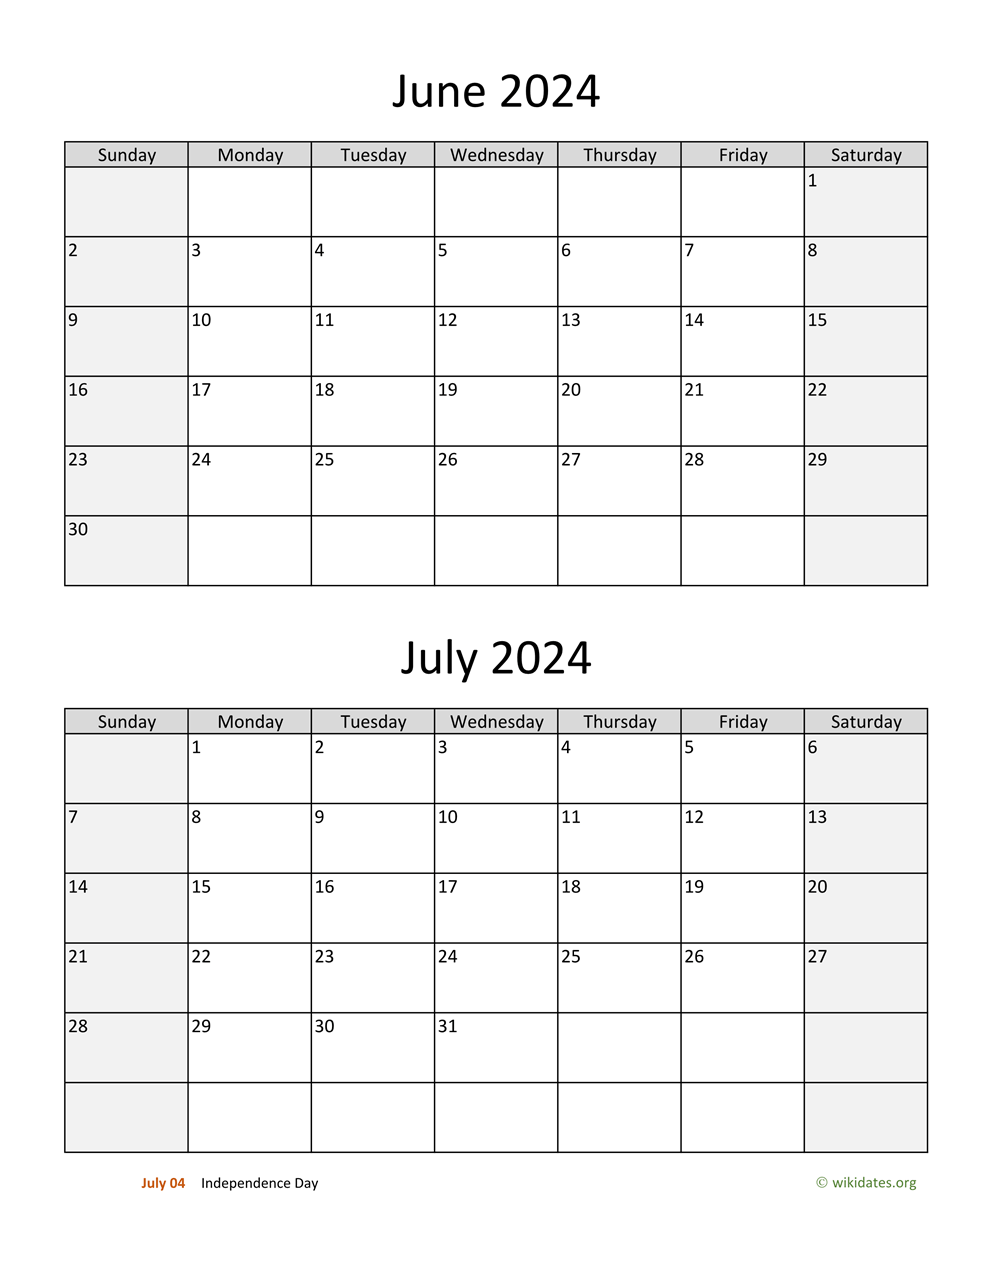 June And July 2024 Calendar | Wikidates for June And July Calendar 2024 Printable